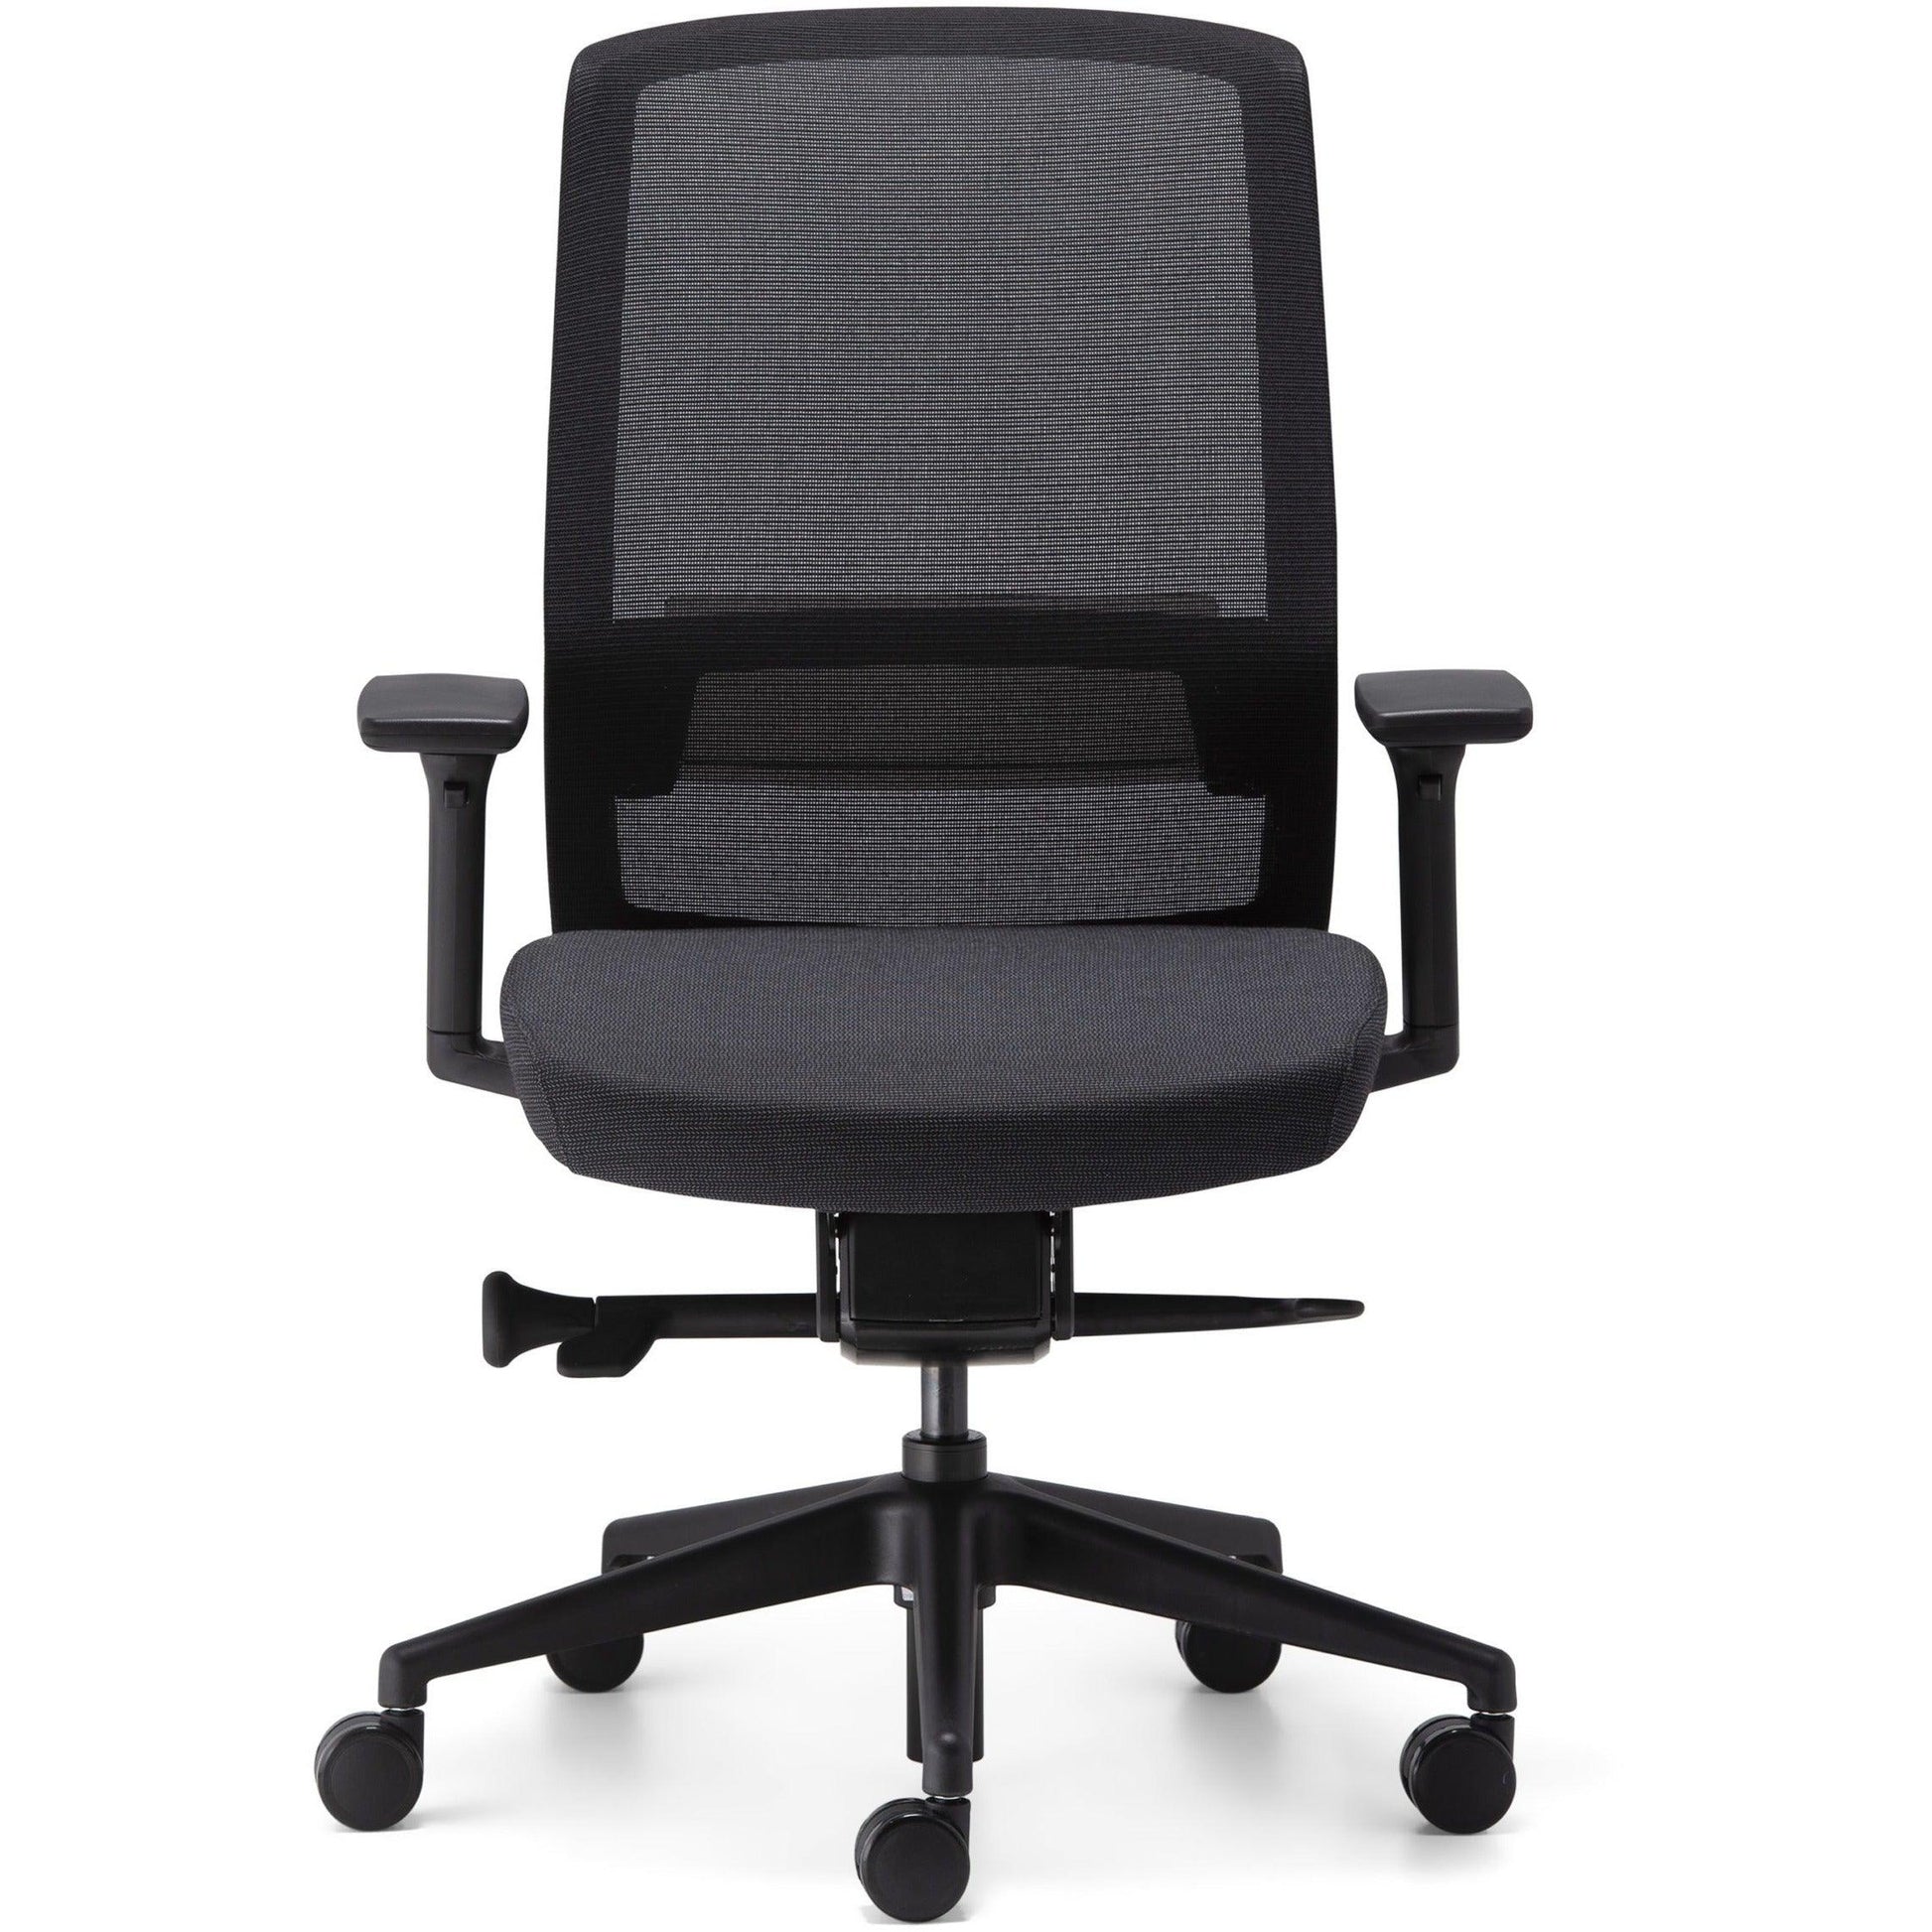 Aveya Black Office Chair with Boost Adjustable Lumbar Support - Office Furniture Company 